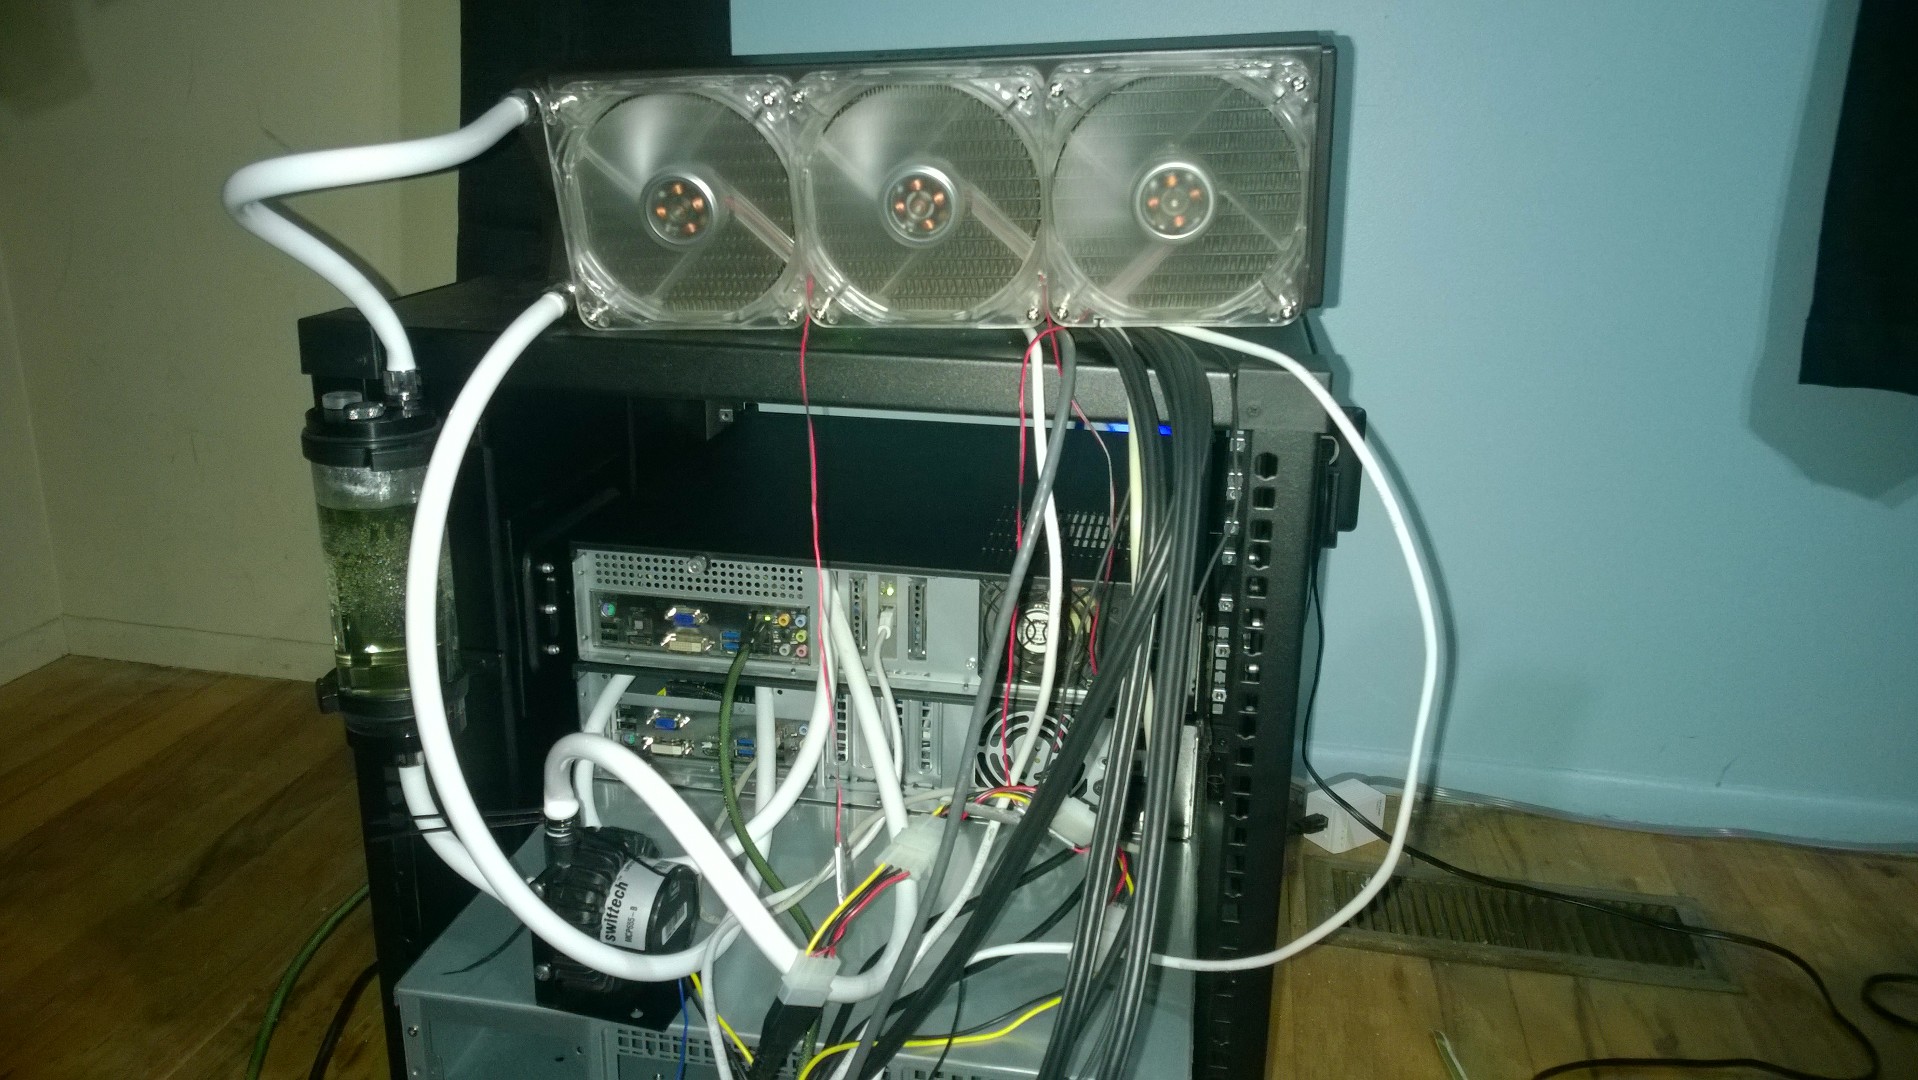 water cooled server rack